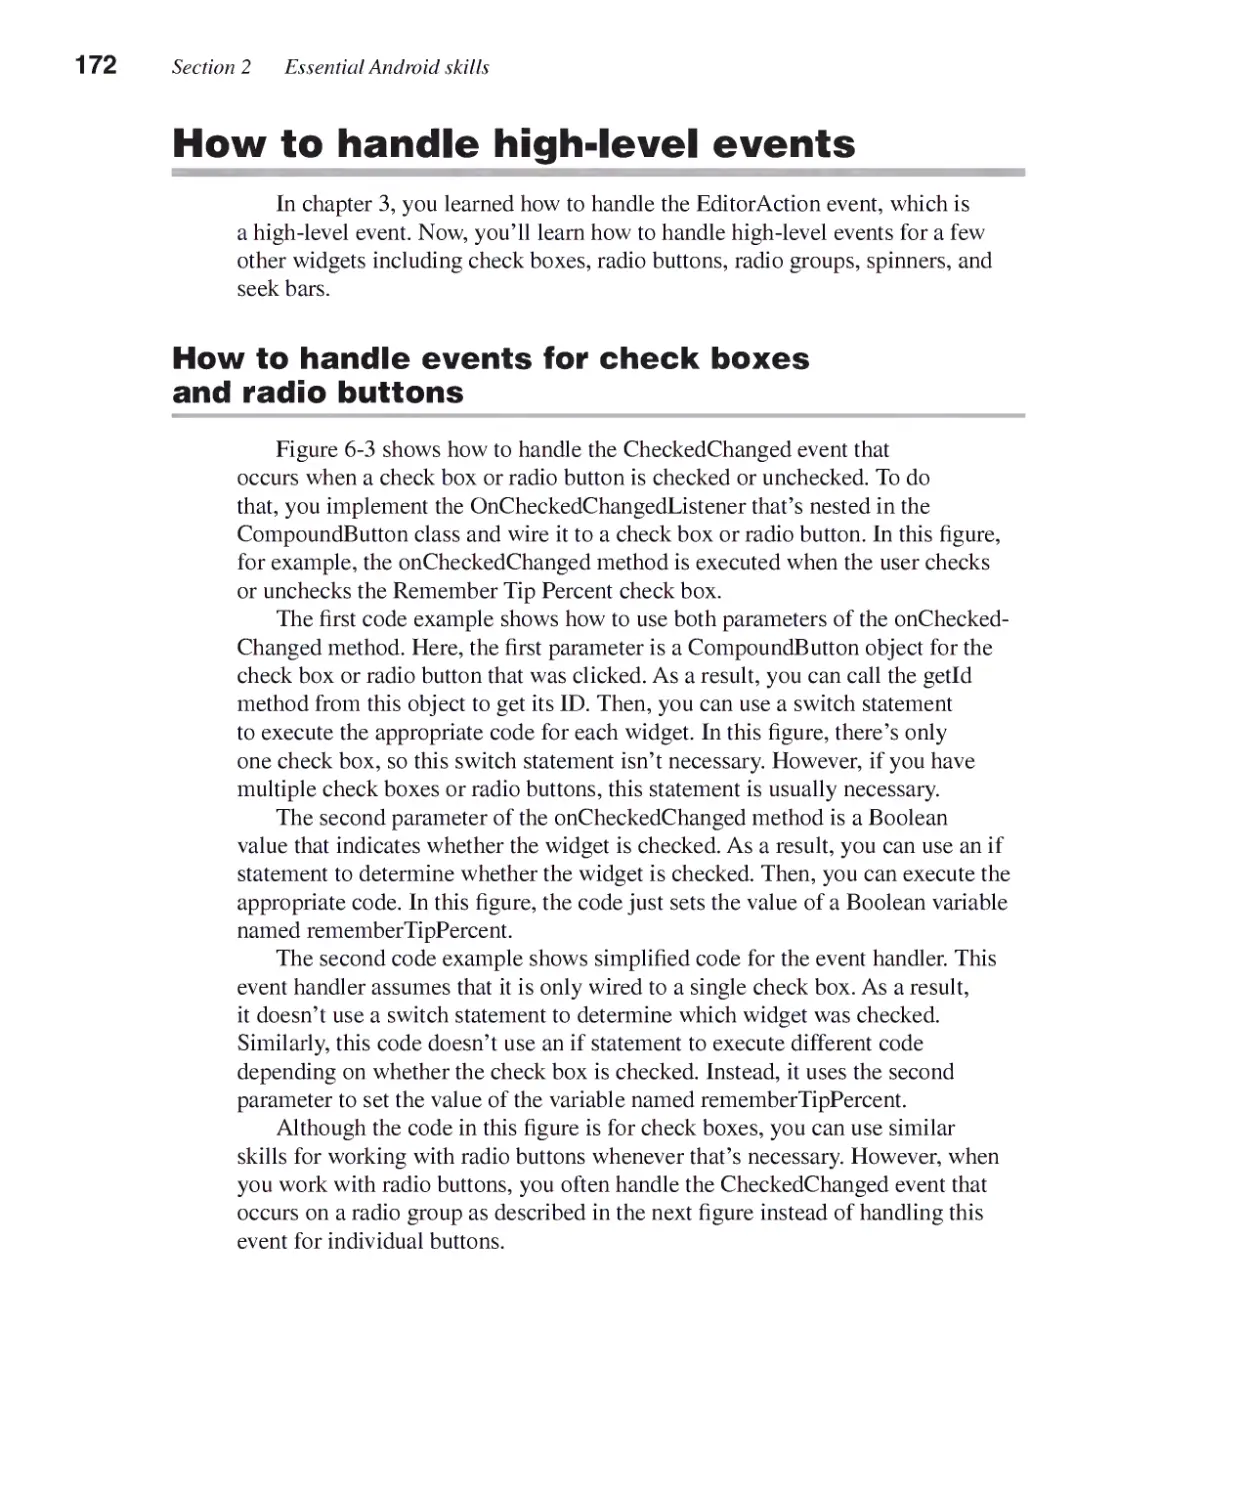 How to Handle High-Level Events